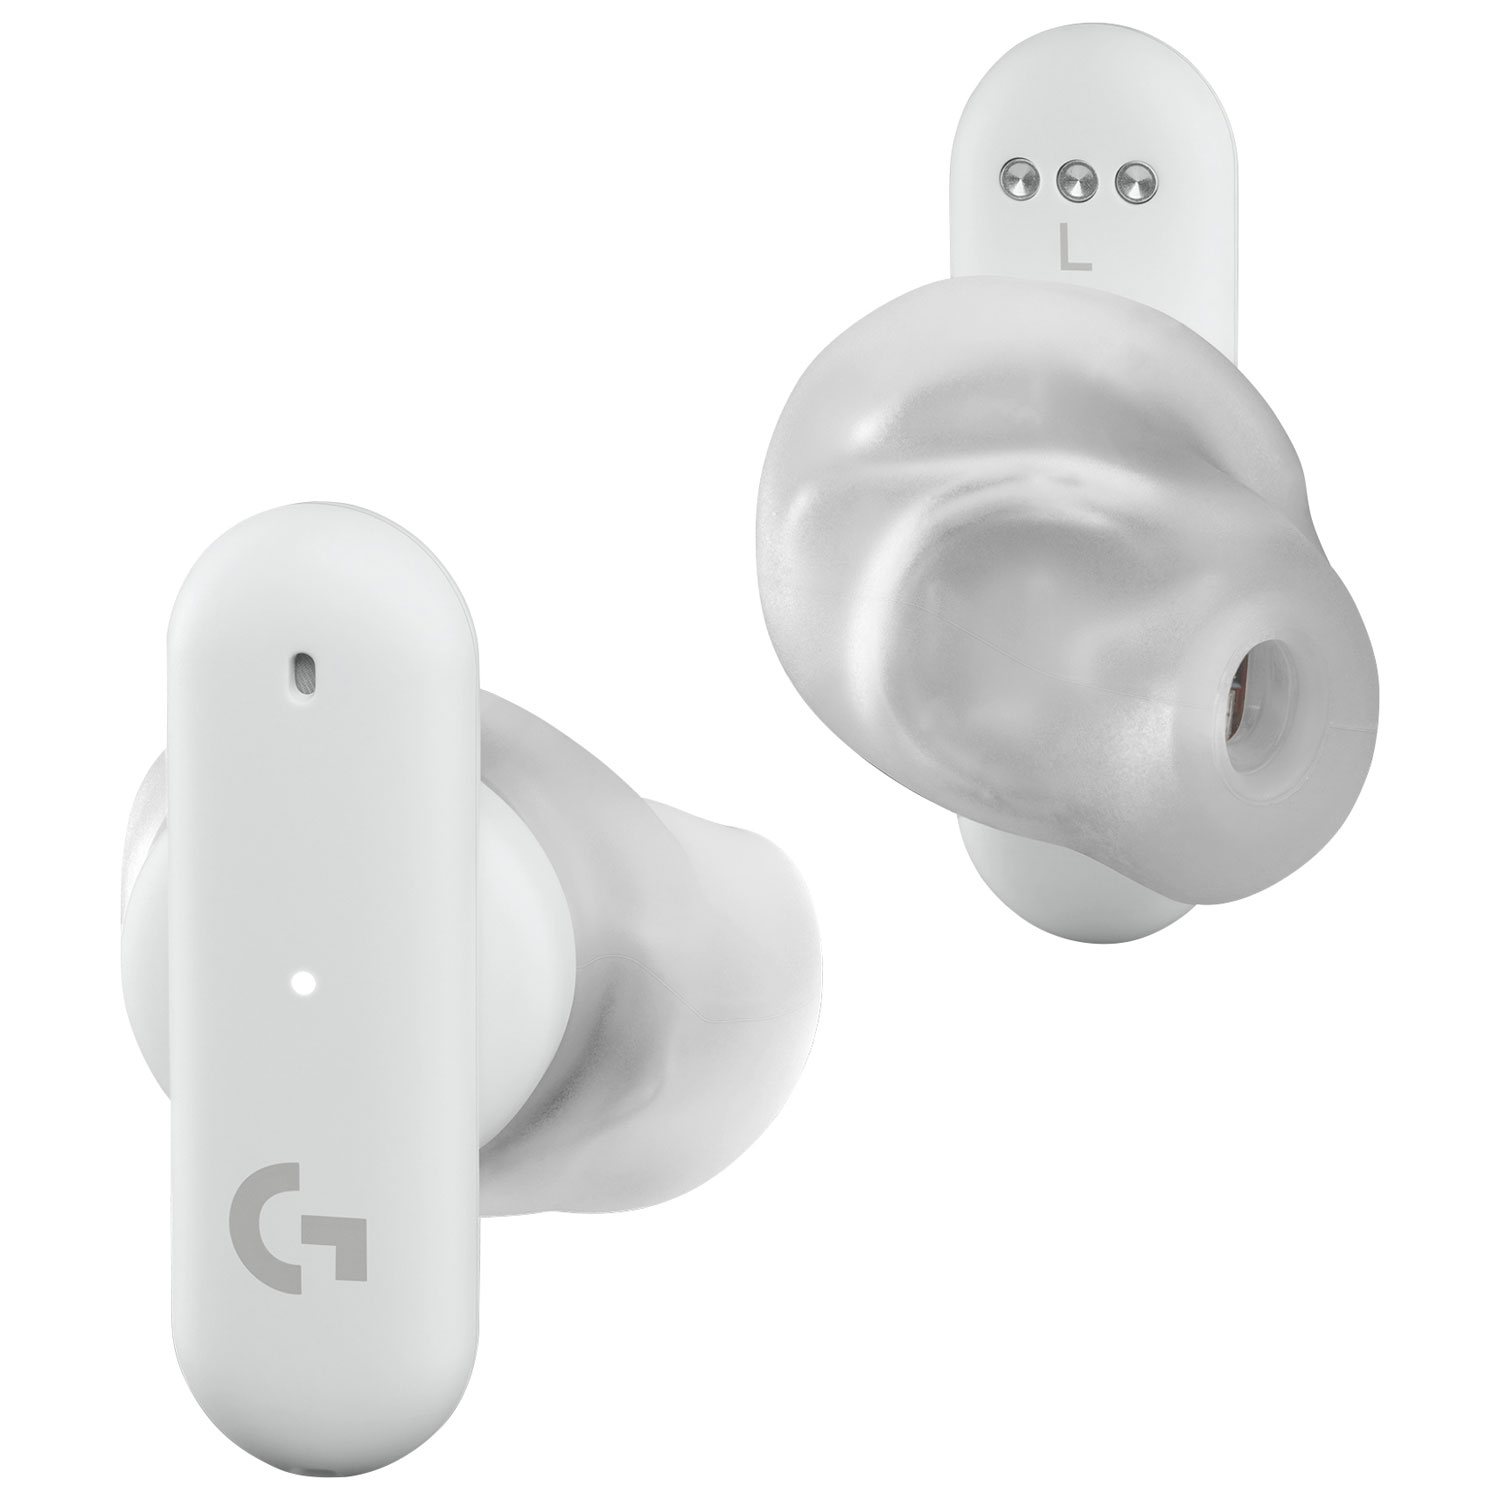 Logitech G FITS In-Ear Sound Isolating Truly Wireless Headphones - White